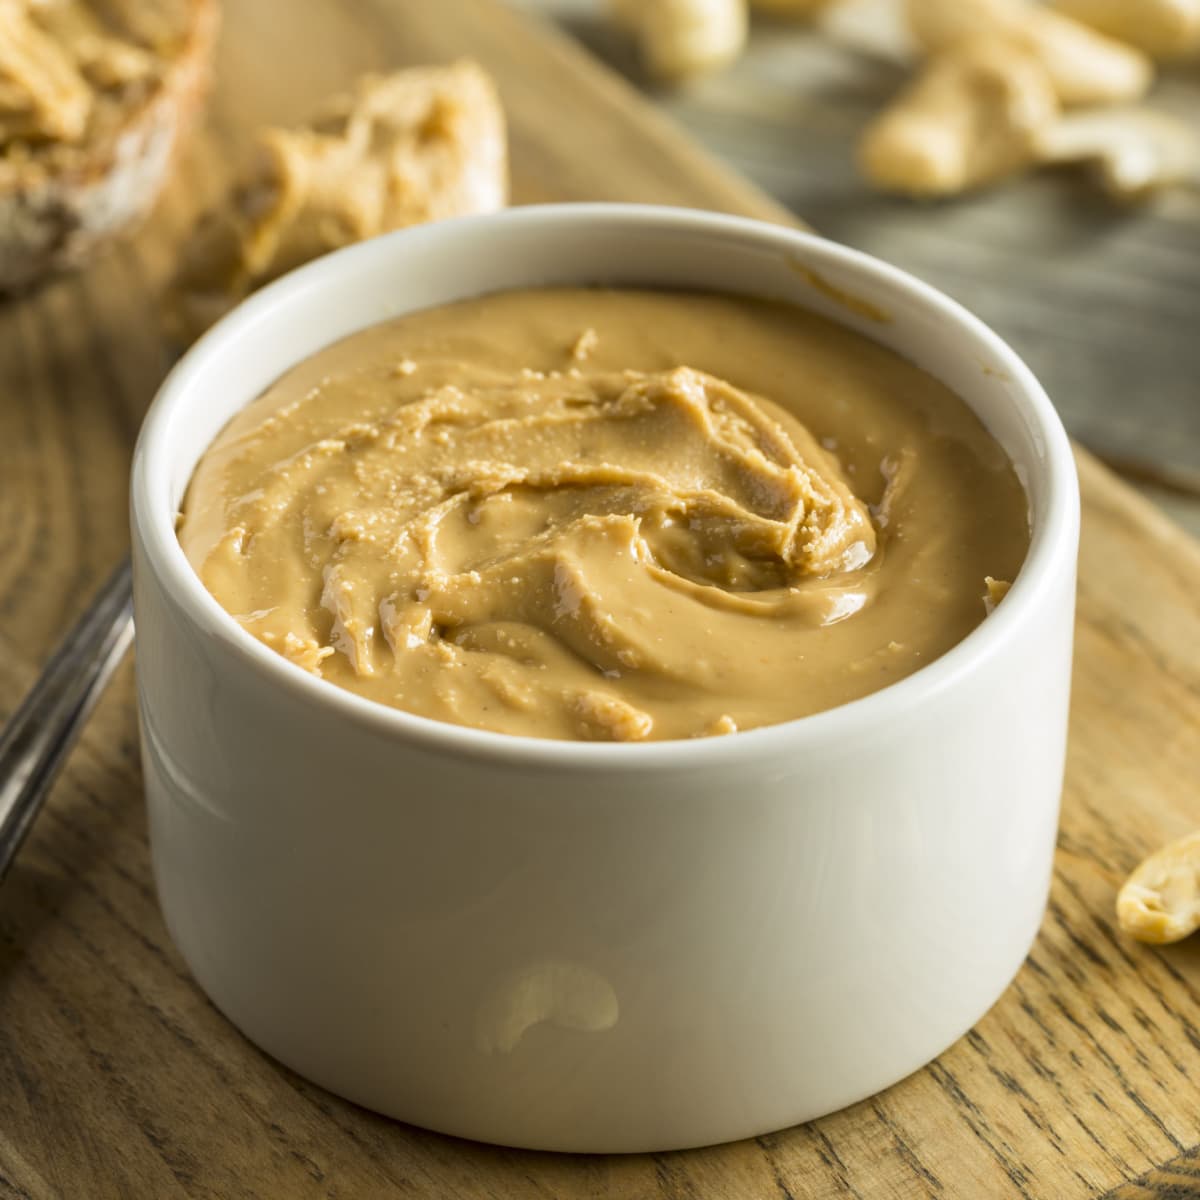 A Bowl of Cashew Butter and Cashews Nuts on a Wooden Table